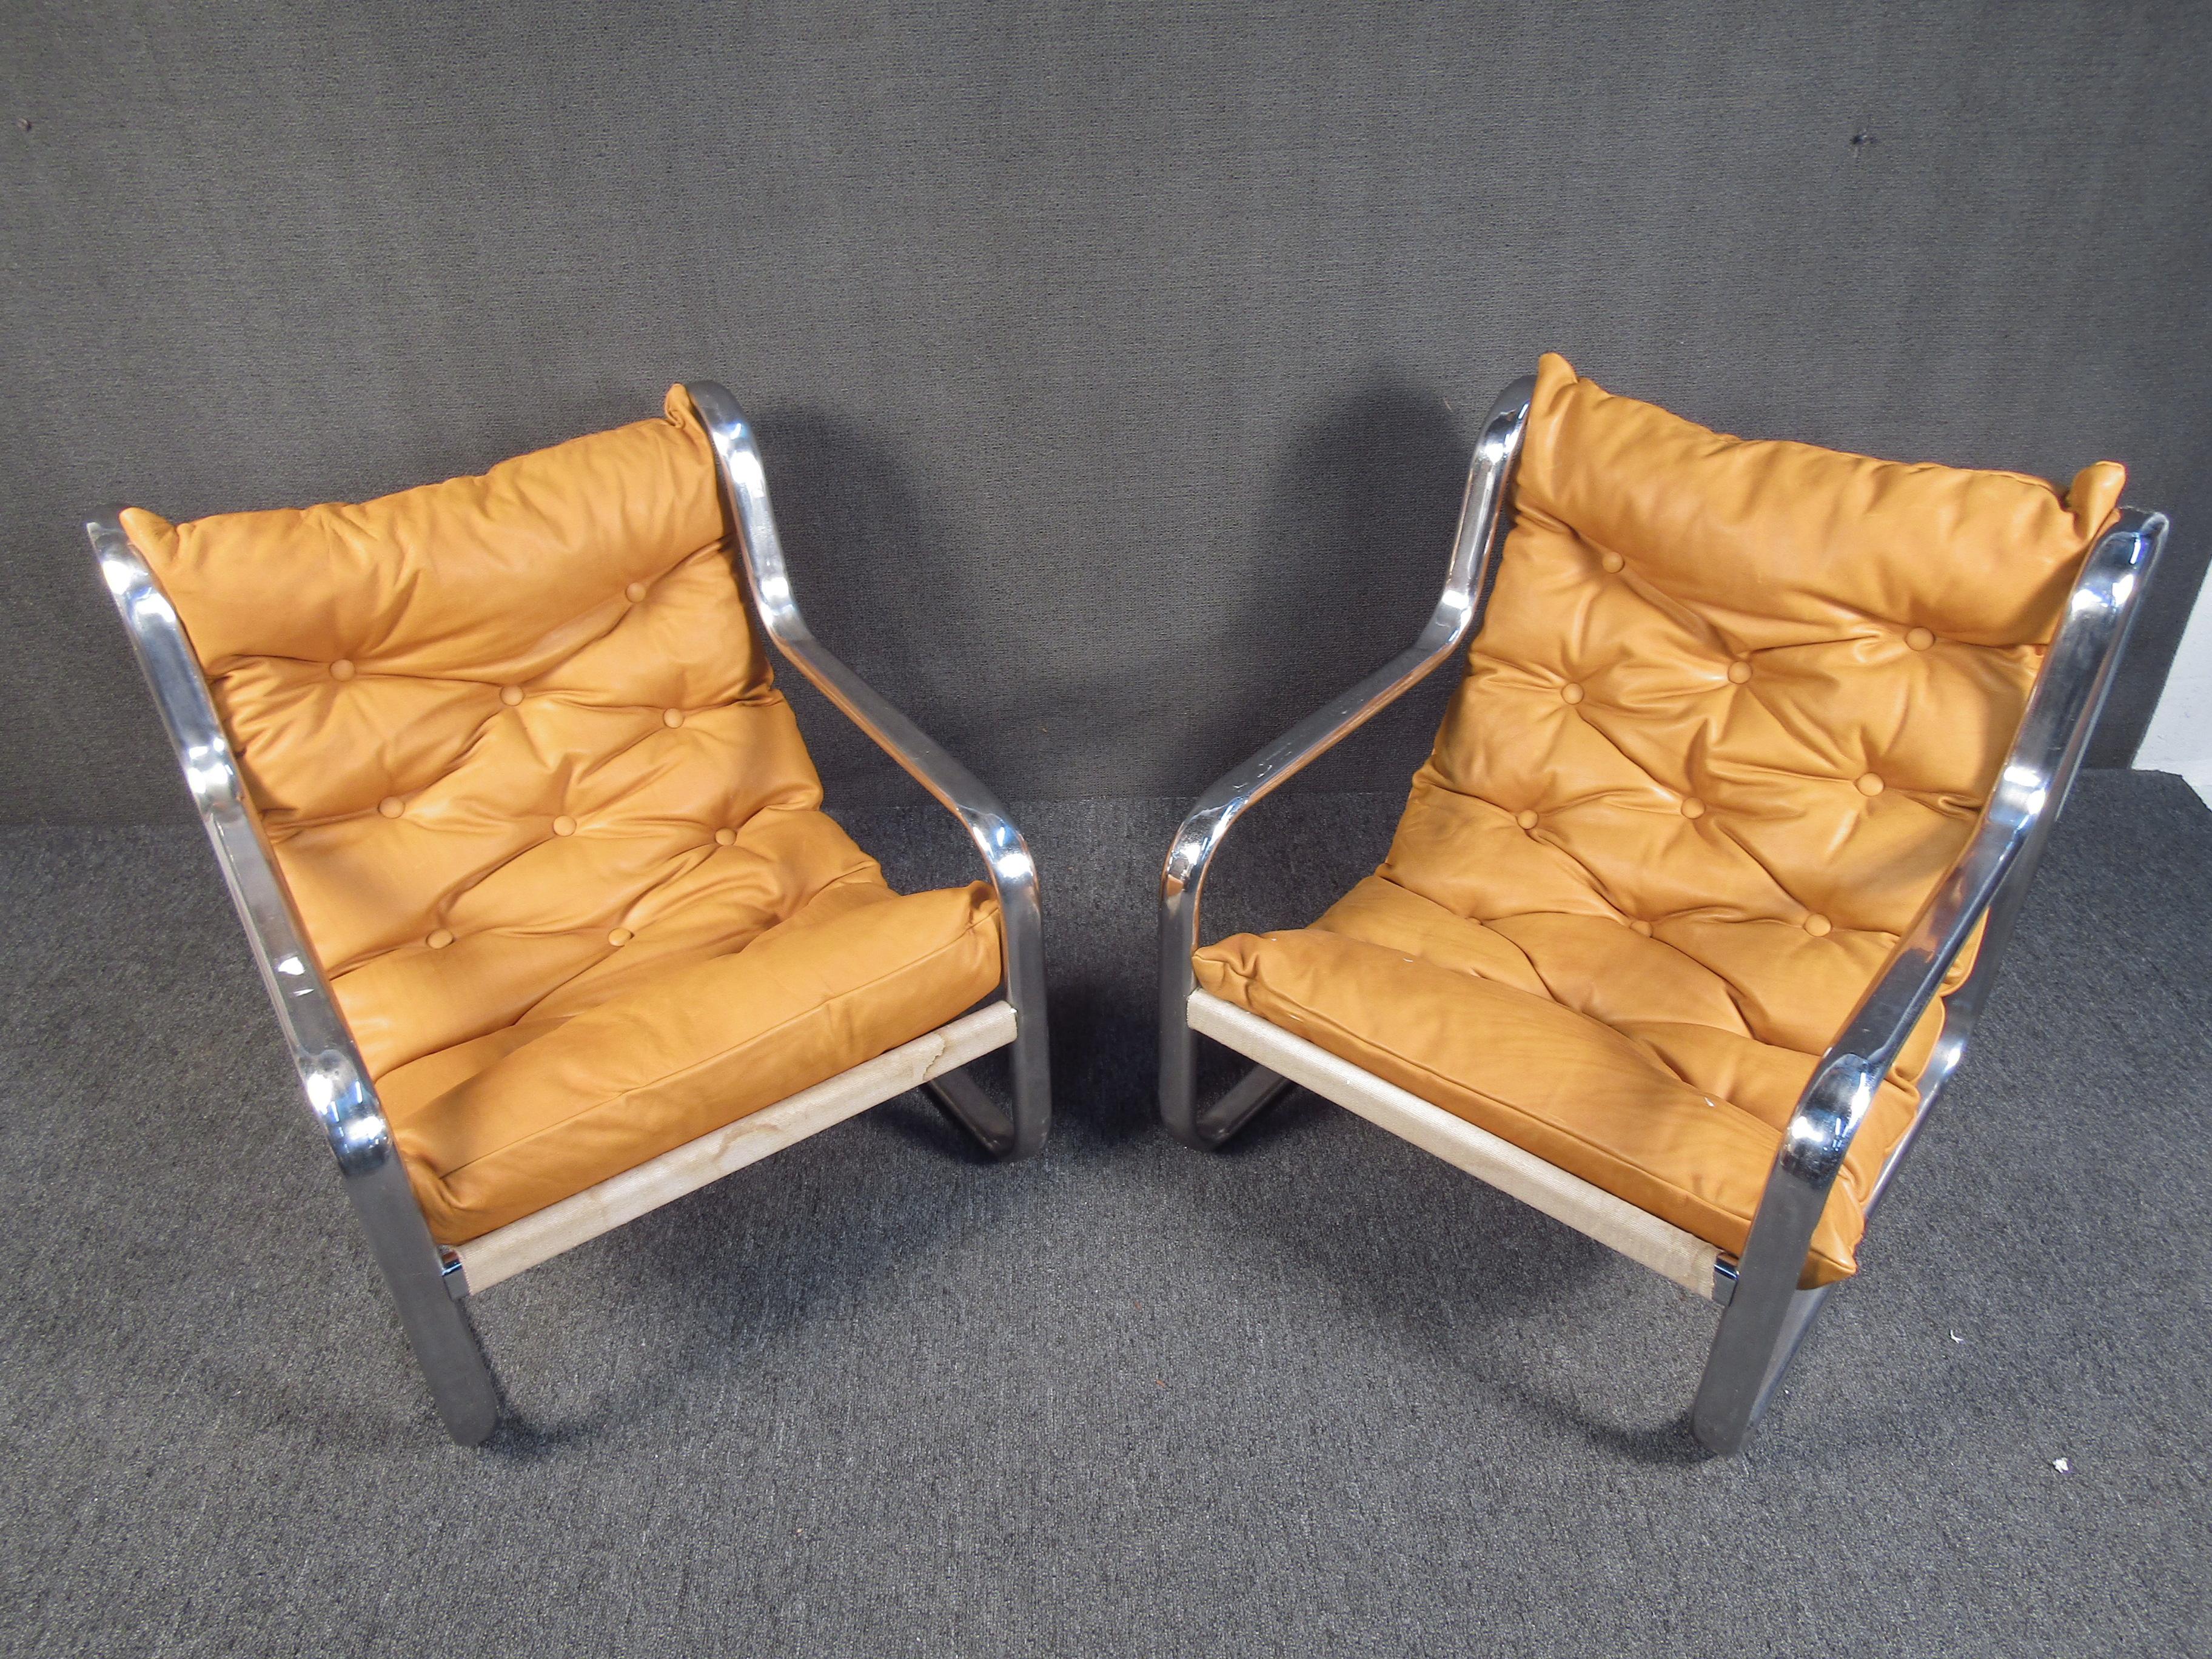 Pair of Stunning Midcentury Leather/ Chrome Italian Lounge Chairs In Good Condition For Sale In Brooklyn, NY